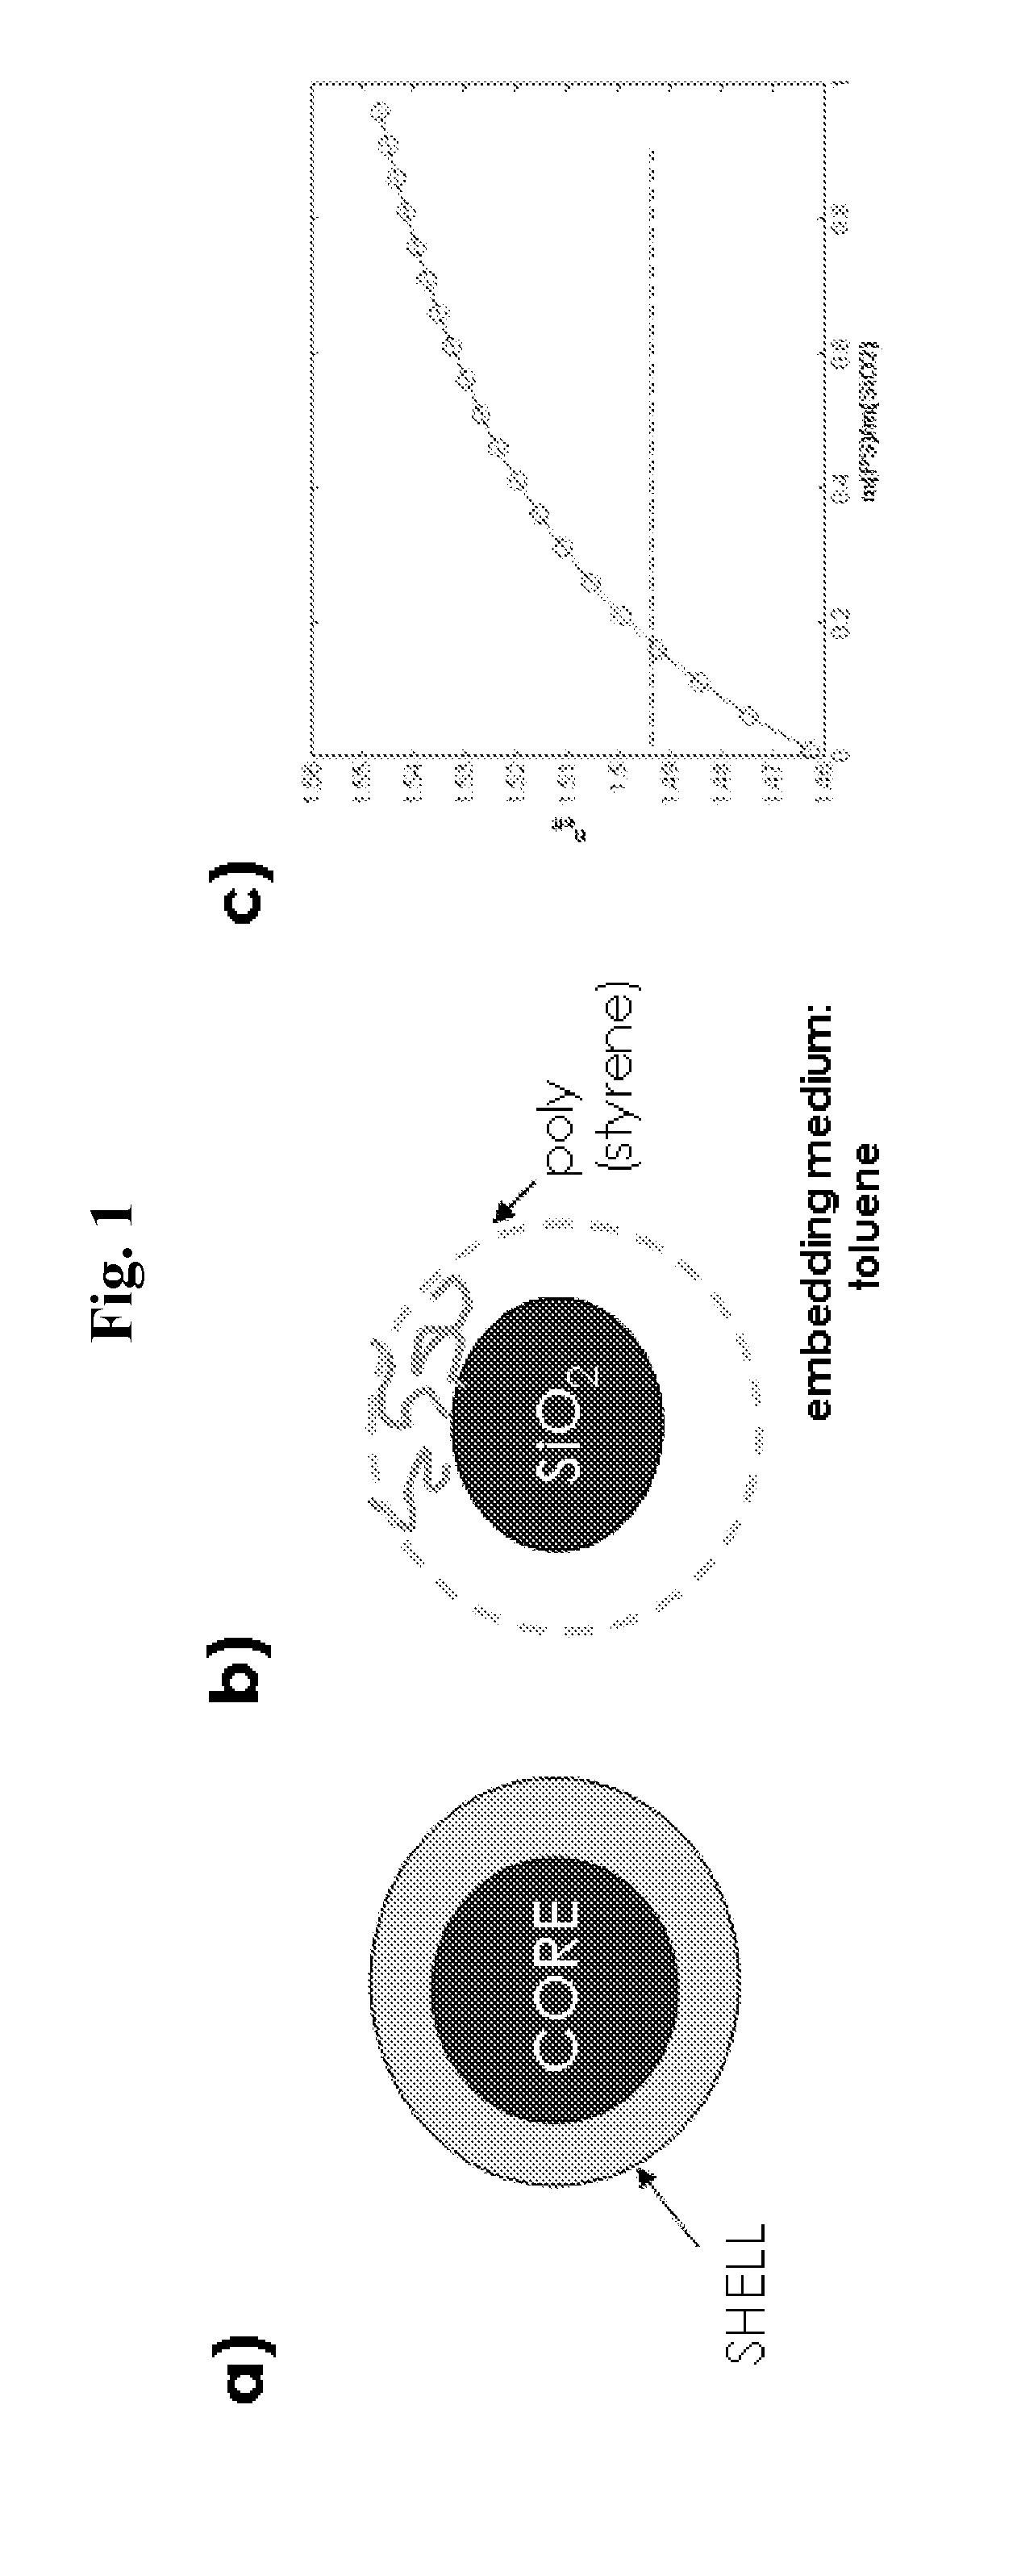 Hybrid partice composite structures with reduced scattering